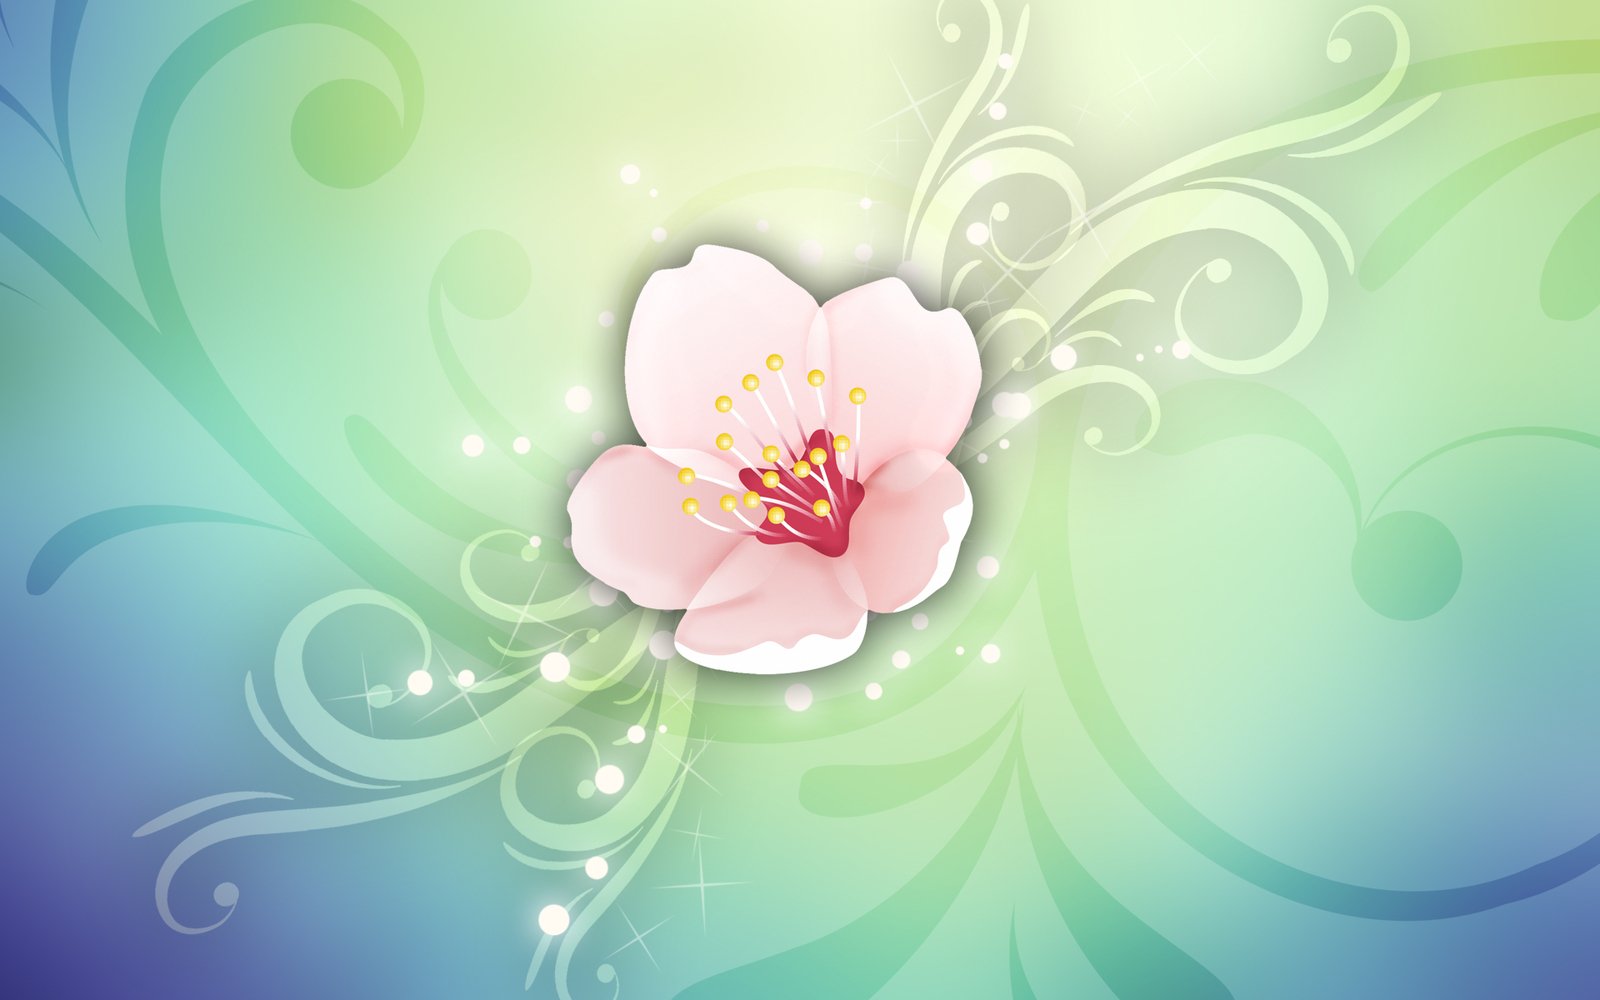 pink flower on green and purple background with swirls